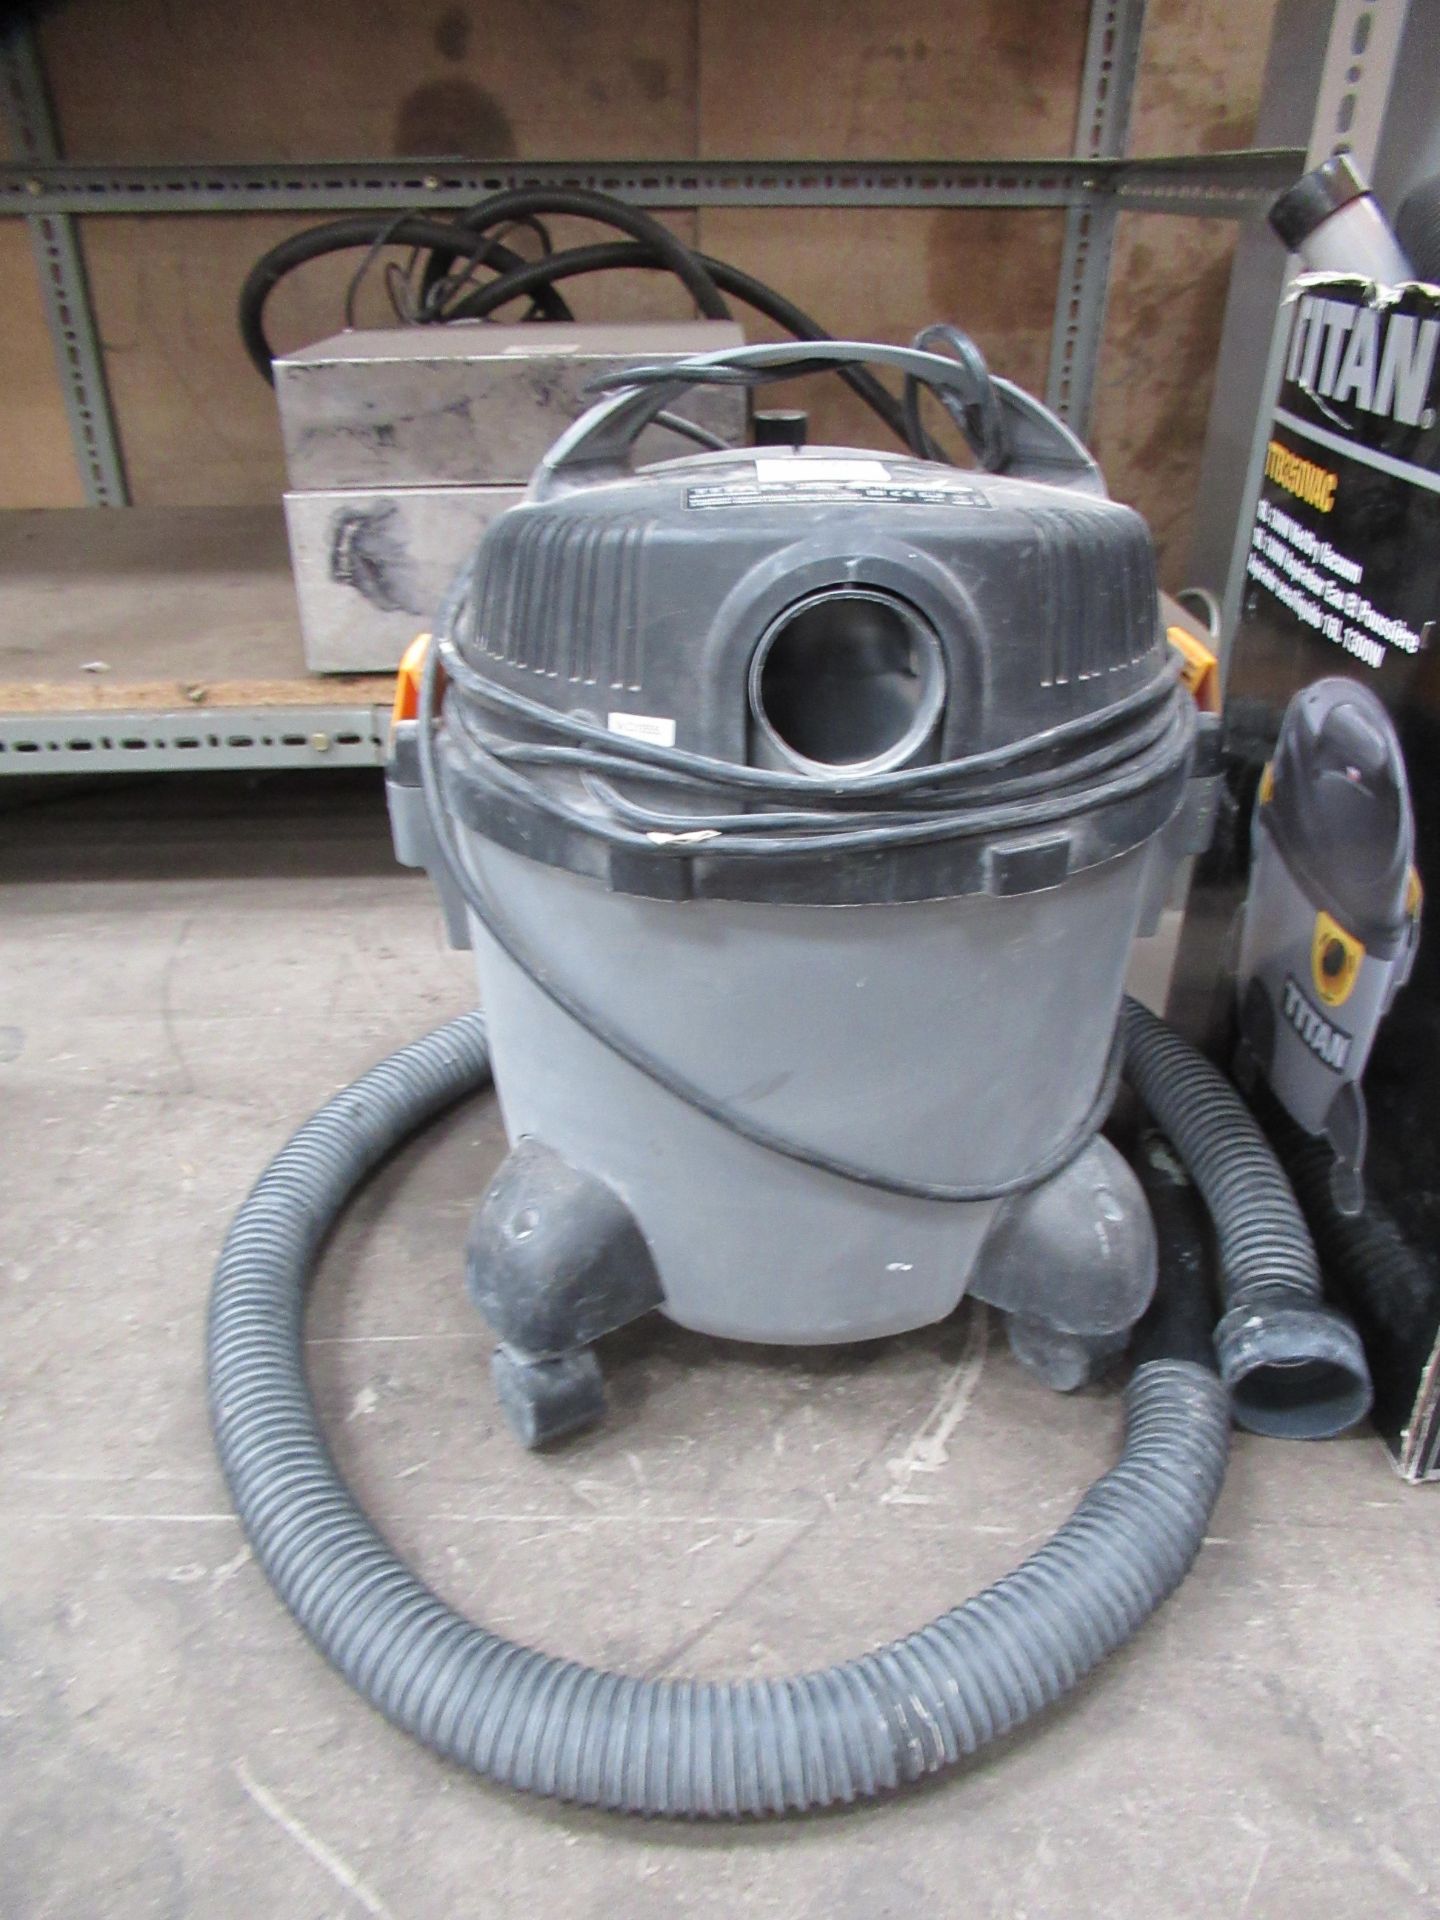 A 240V Titan wet/dry vacuum cleaner - Image 2 of 4